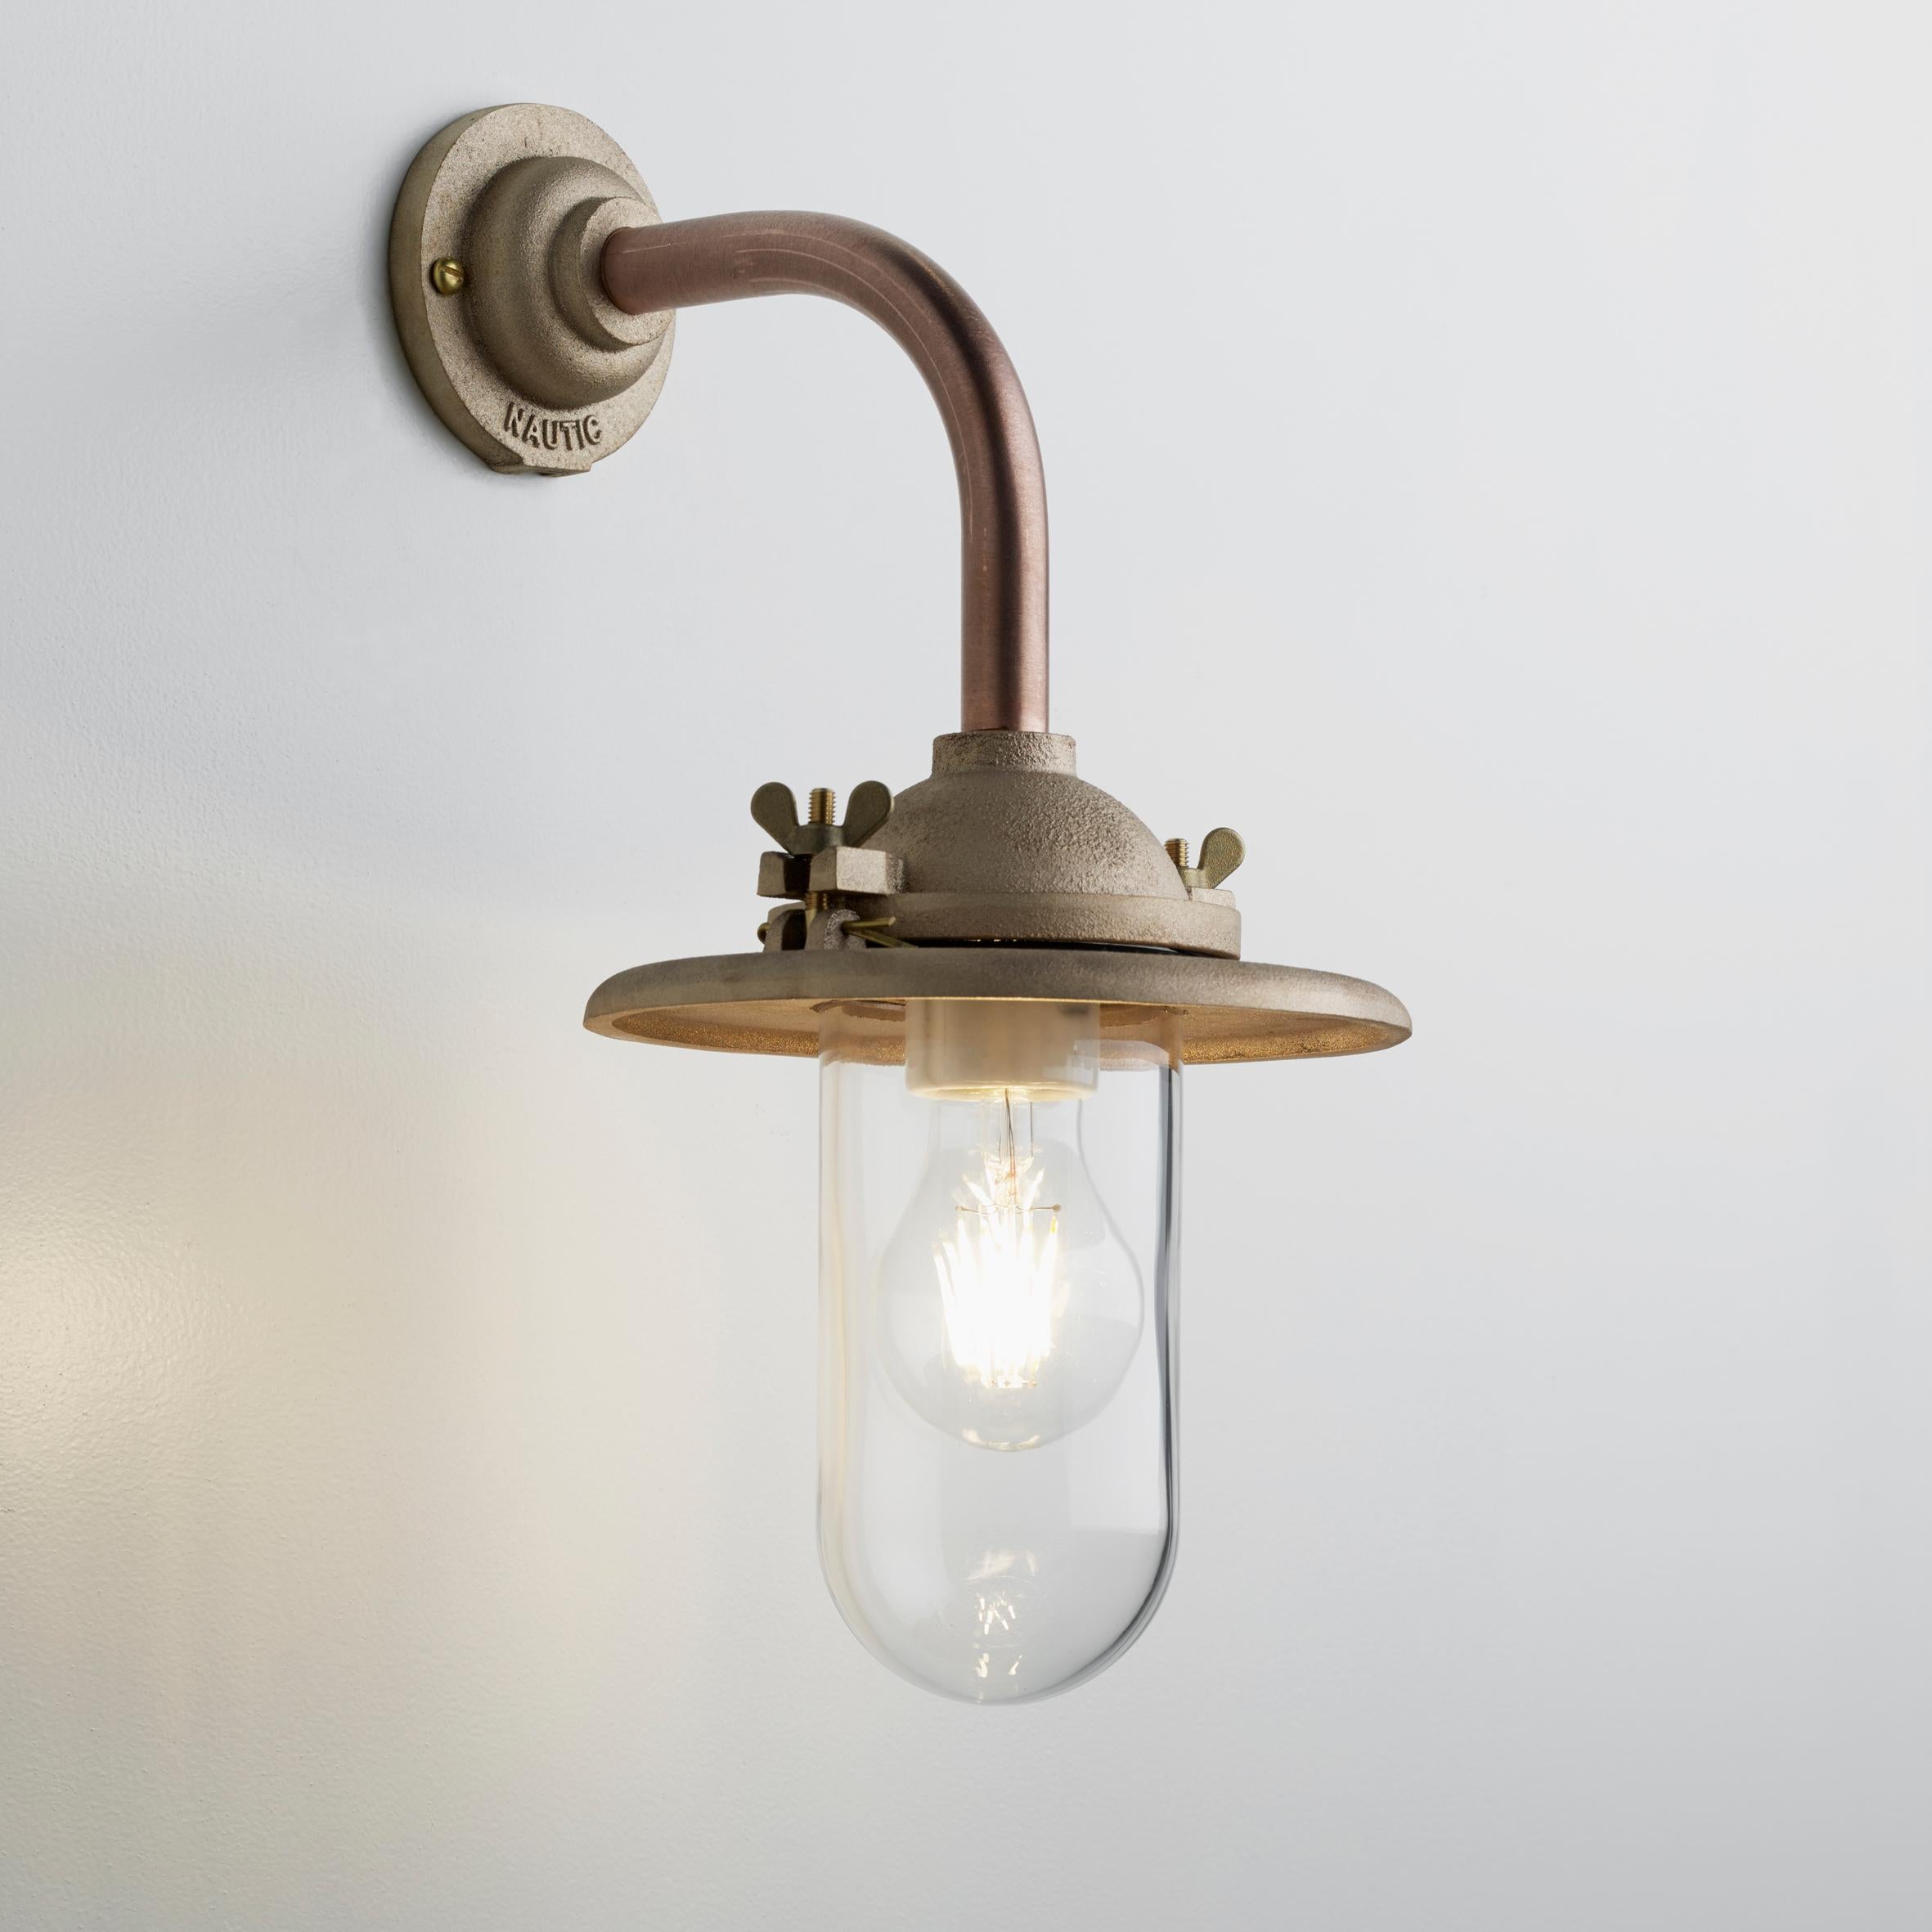 Wall light in copper with 90° arm, reflector and clear or frosted glass. For outdoor use (IP44).

Lamp LED E27 230V 4W 2700K Retro A60. Main power 230V 50Hz.